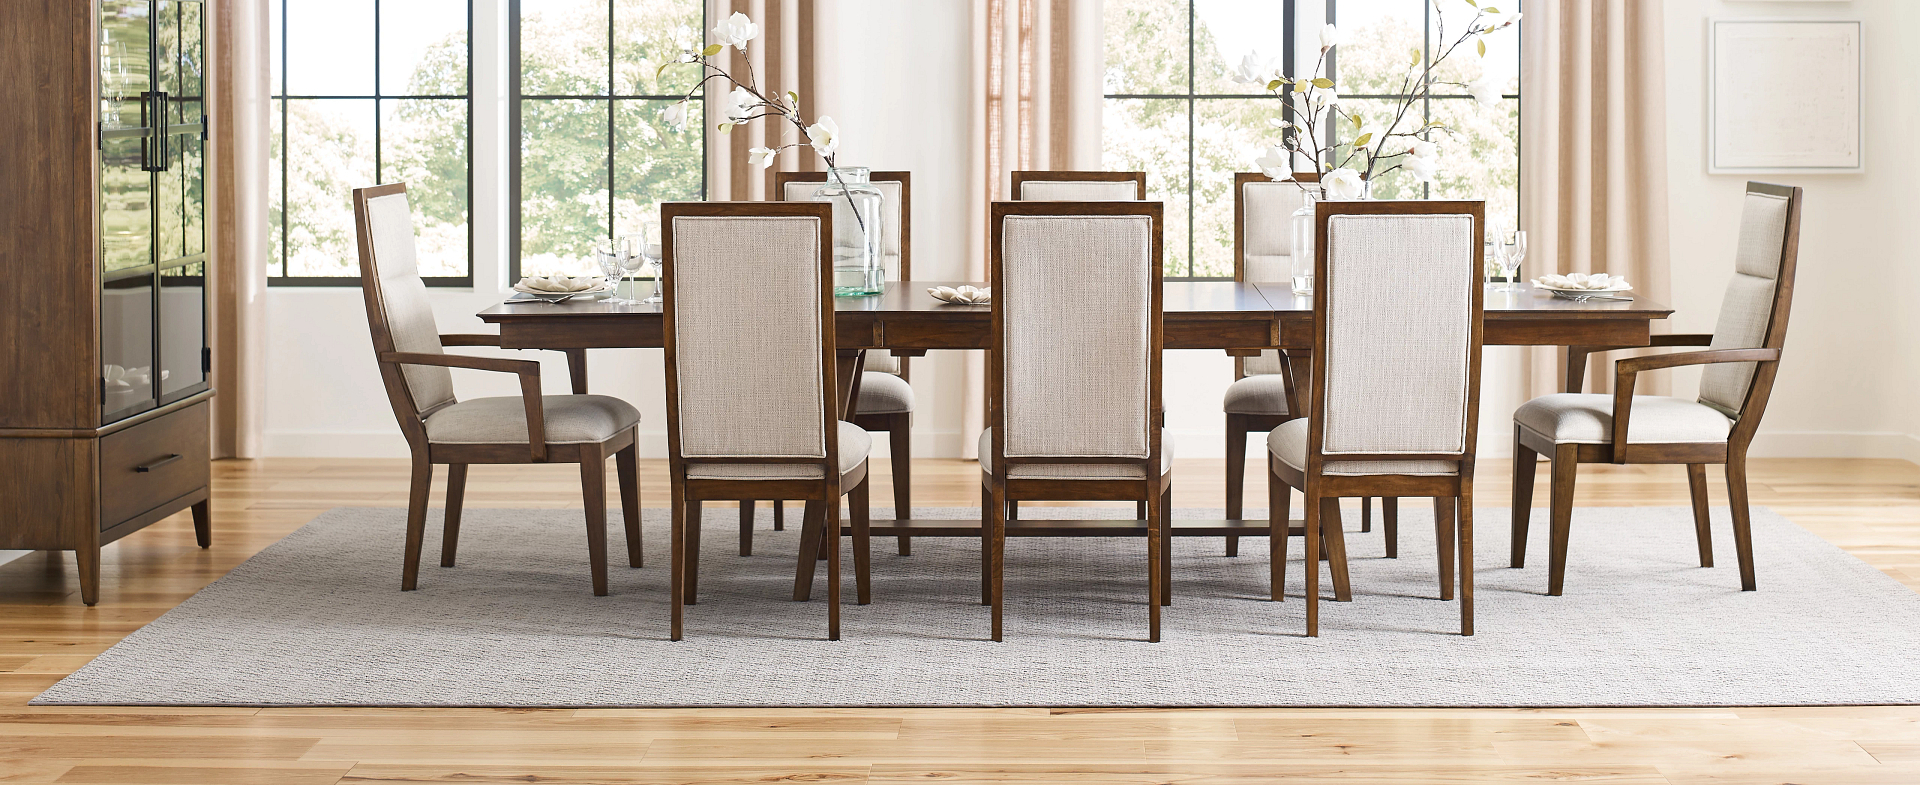 Abode solid wood rectangular dining table with upholstered chairs 